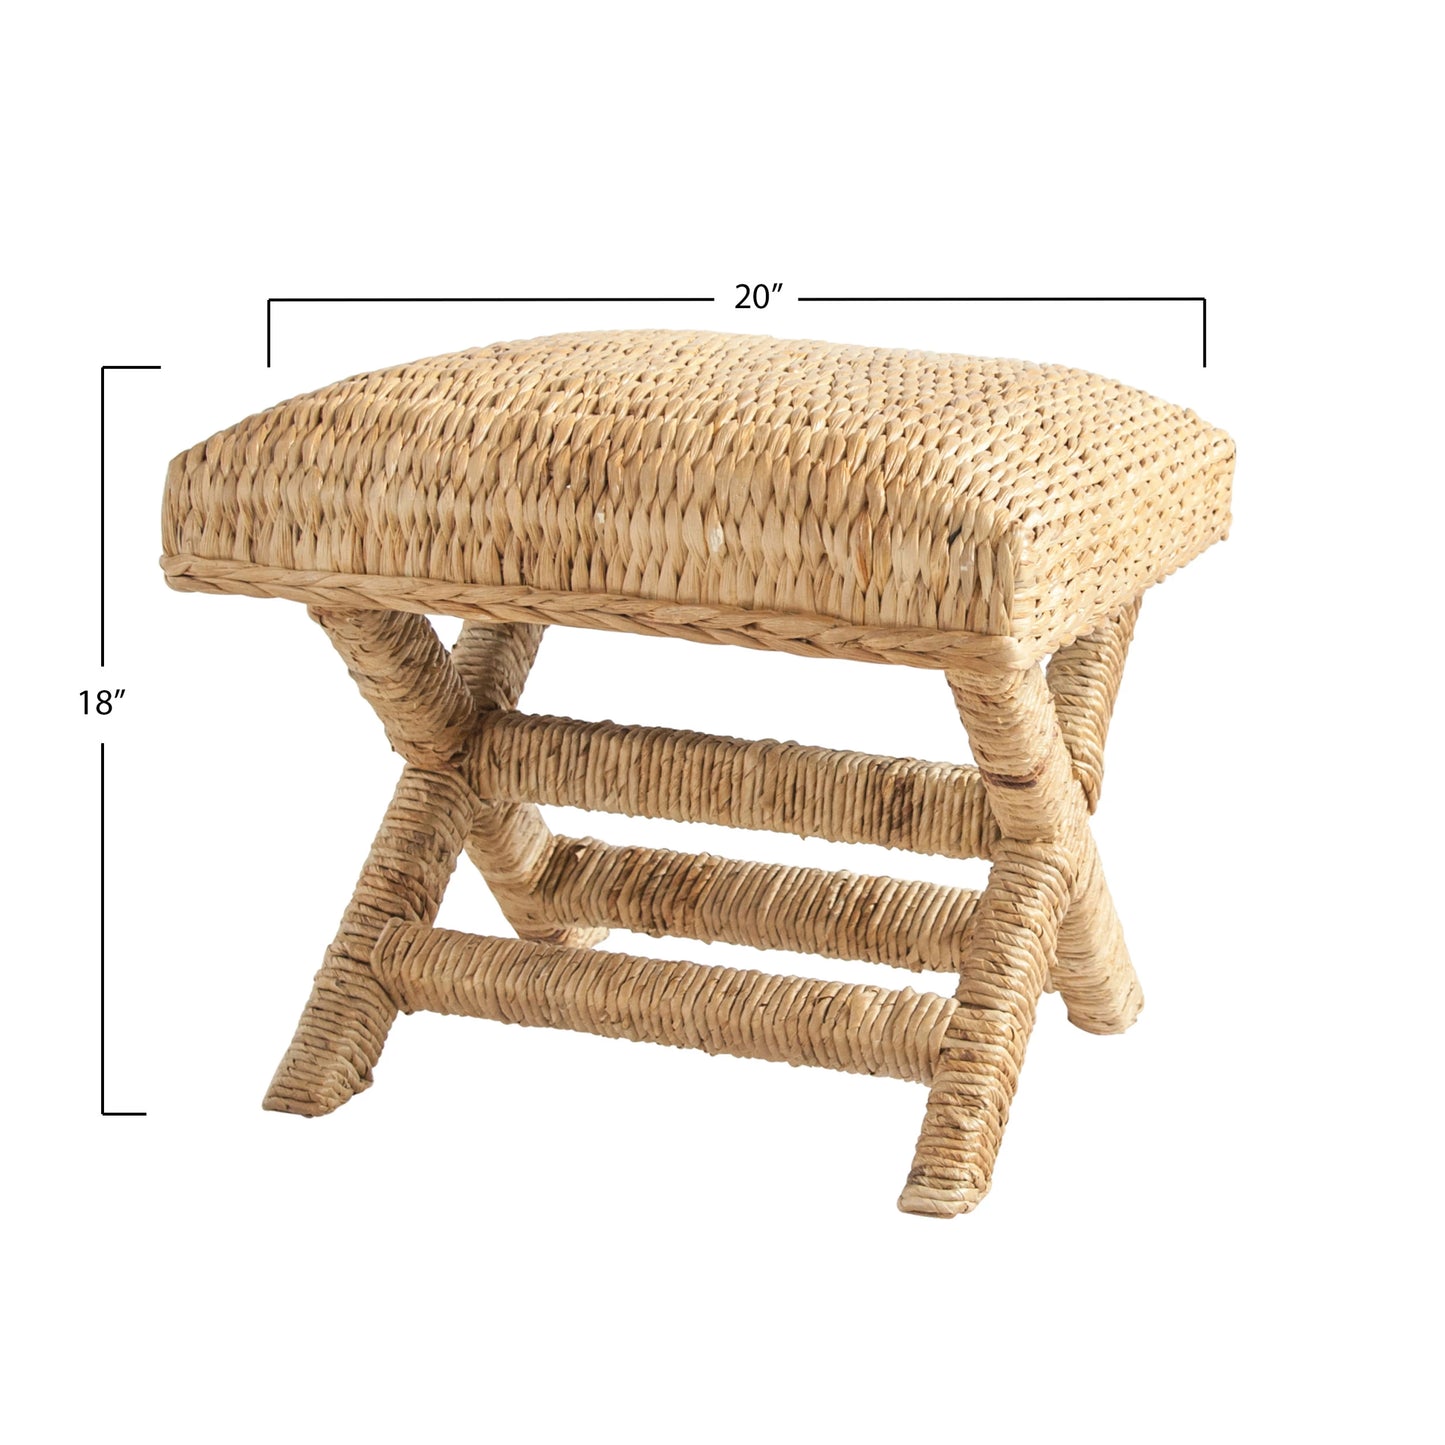 Woven Water Hyacinth and Wood Stool